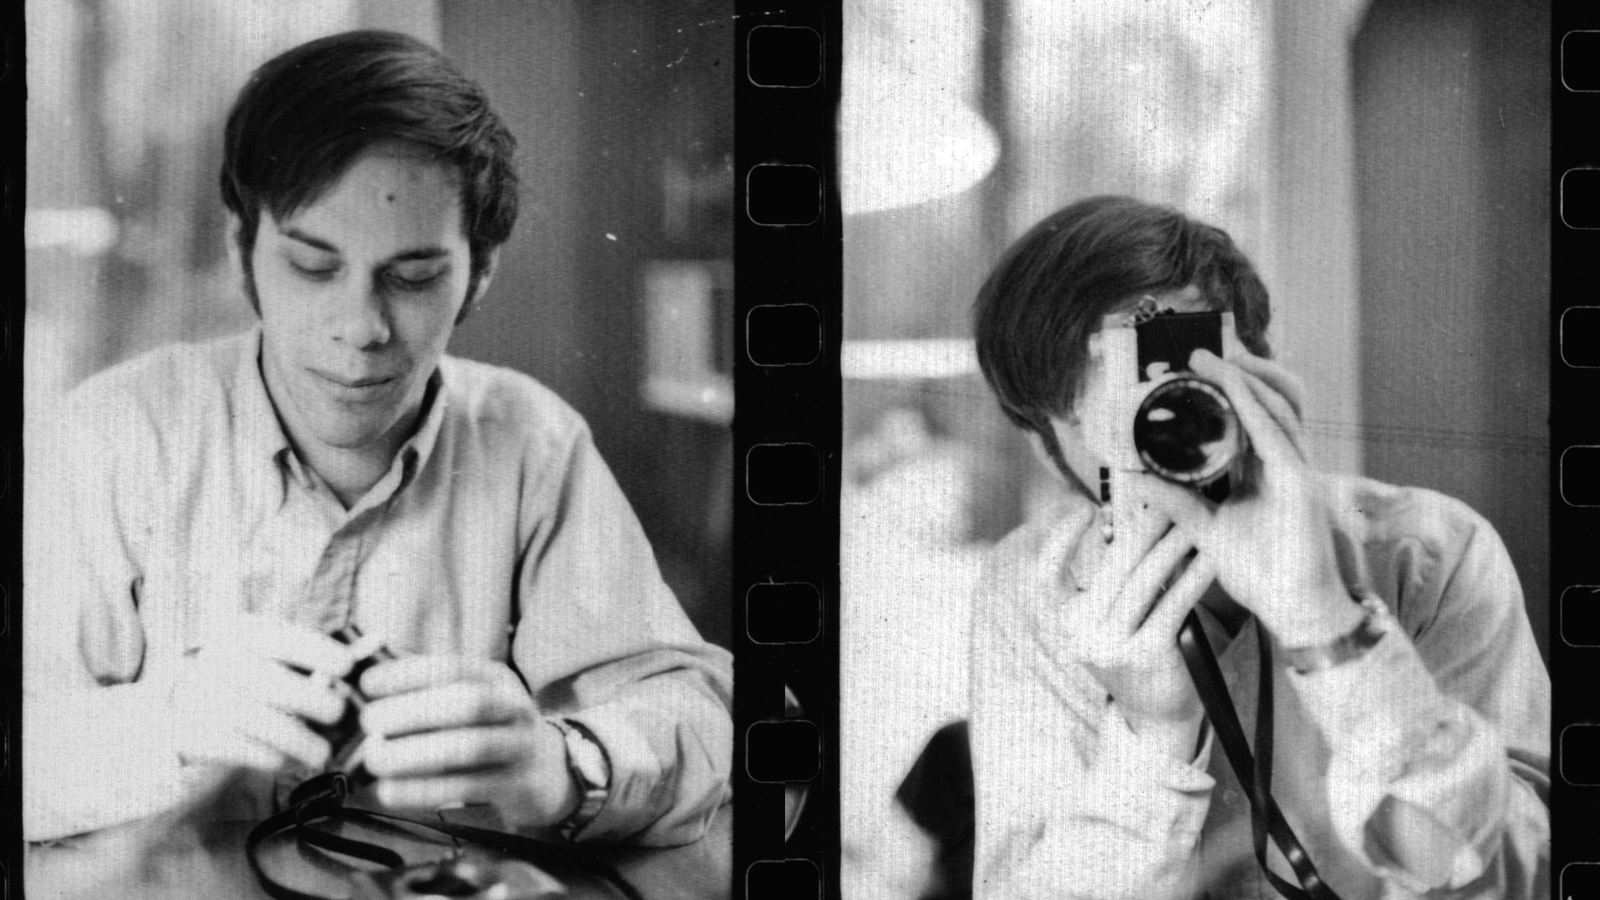 Two of the only photos showing Cunningham with camera in hand